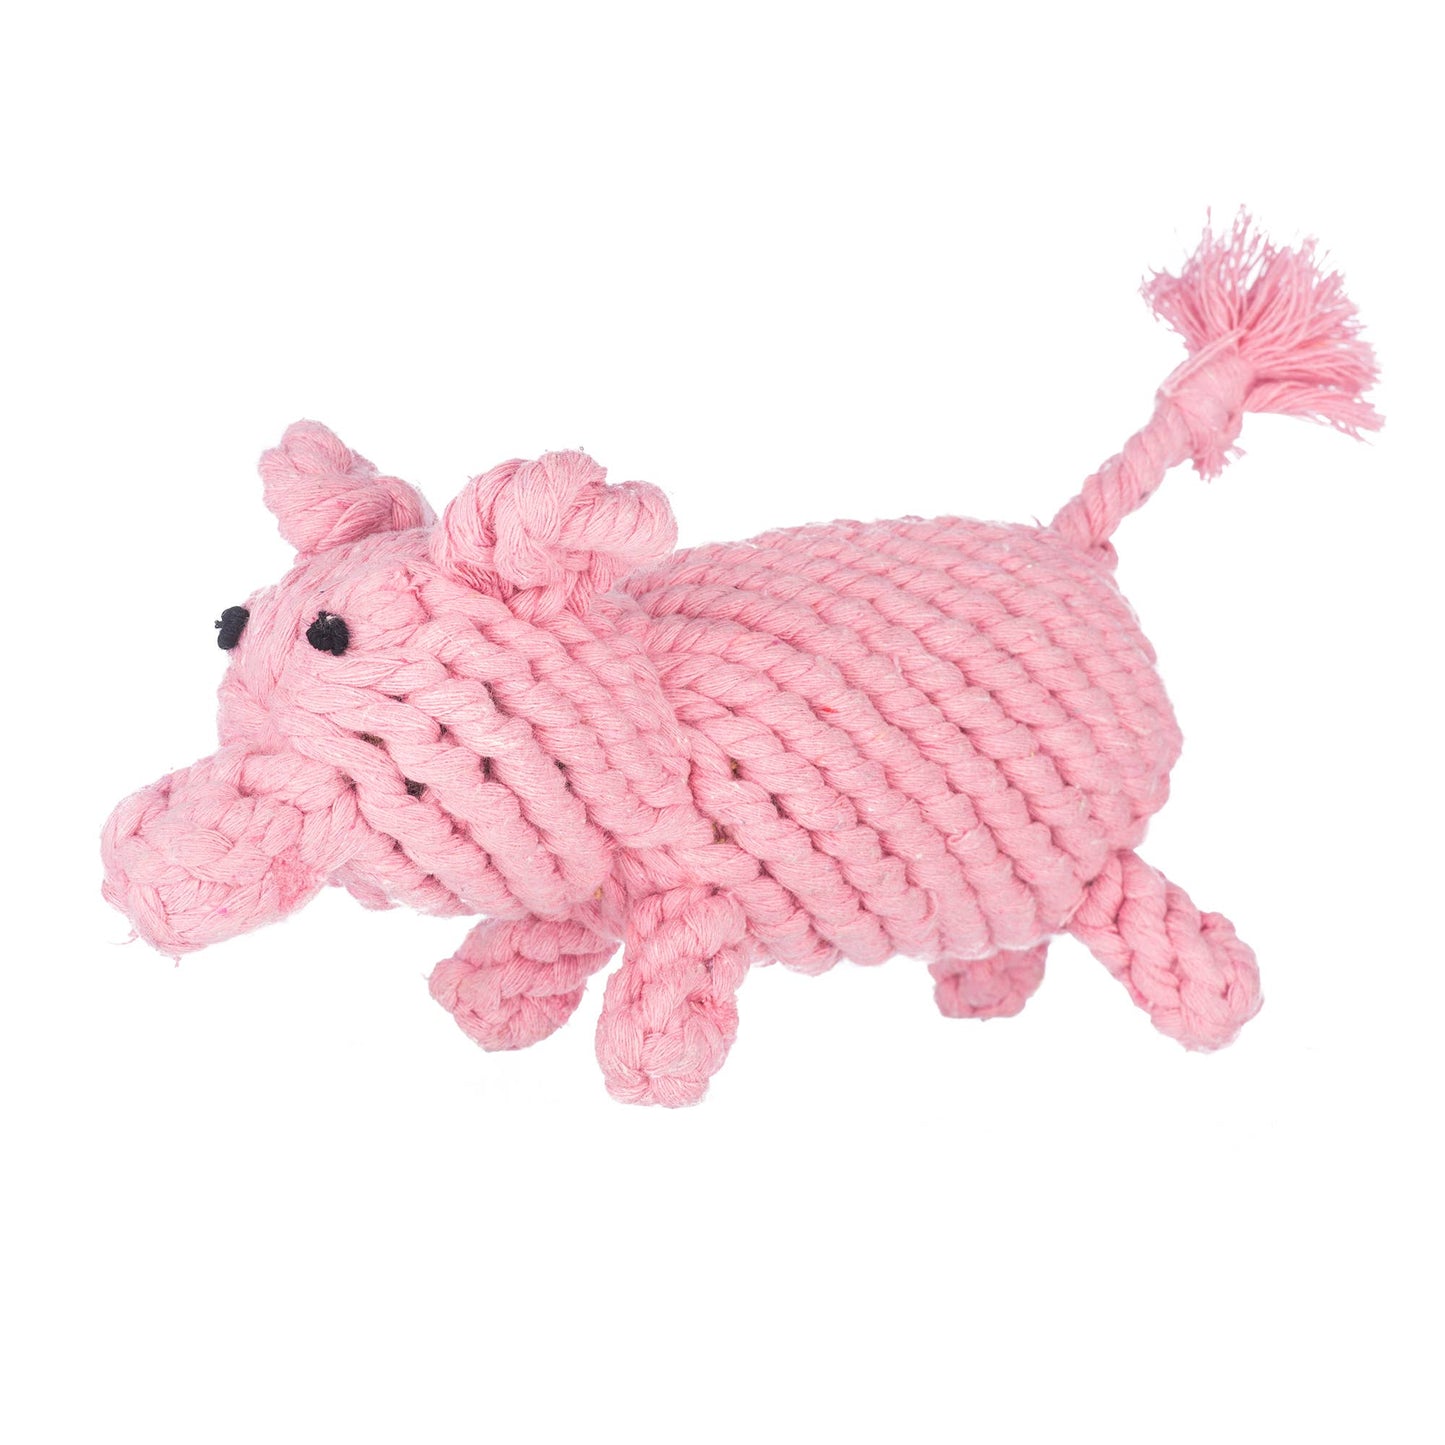 Penny the Pig Rope Toy 9" (Large)